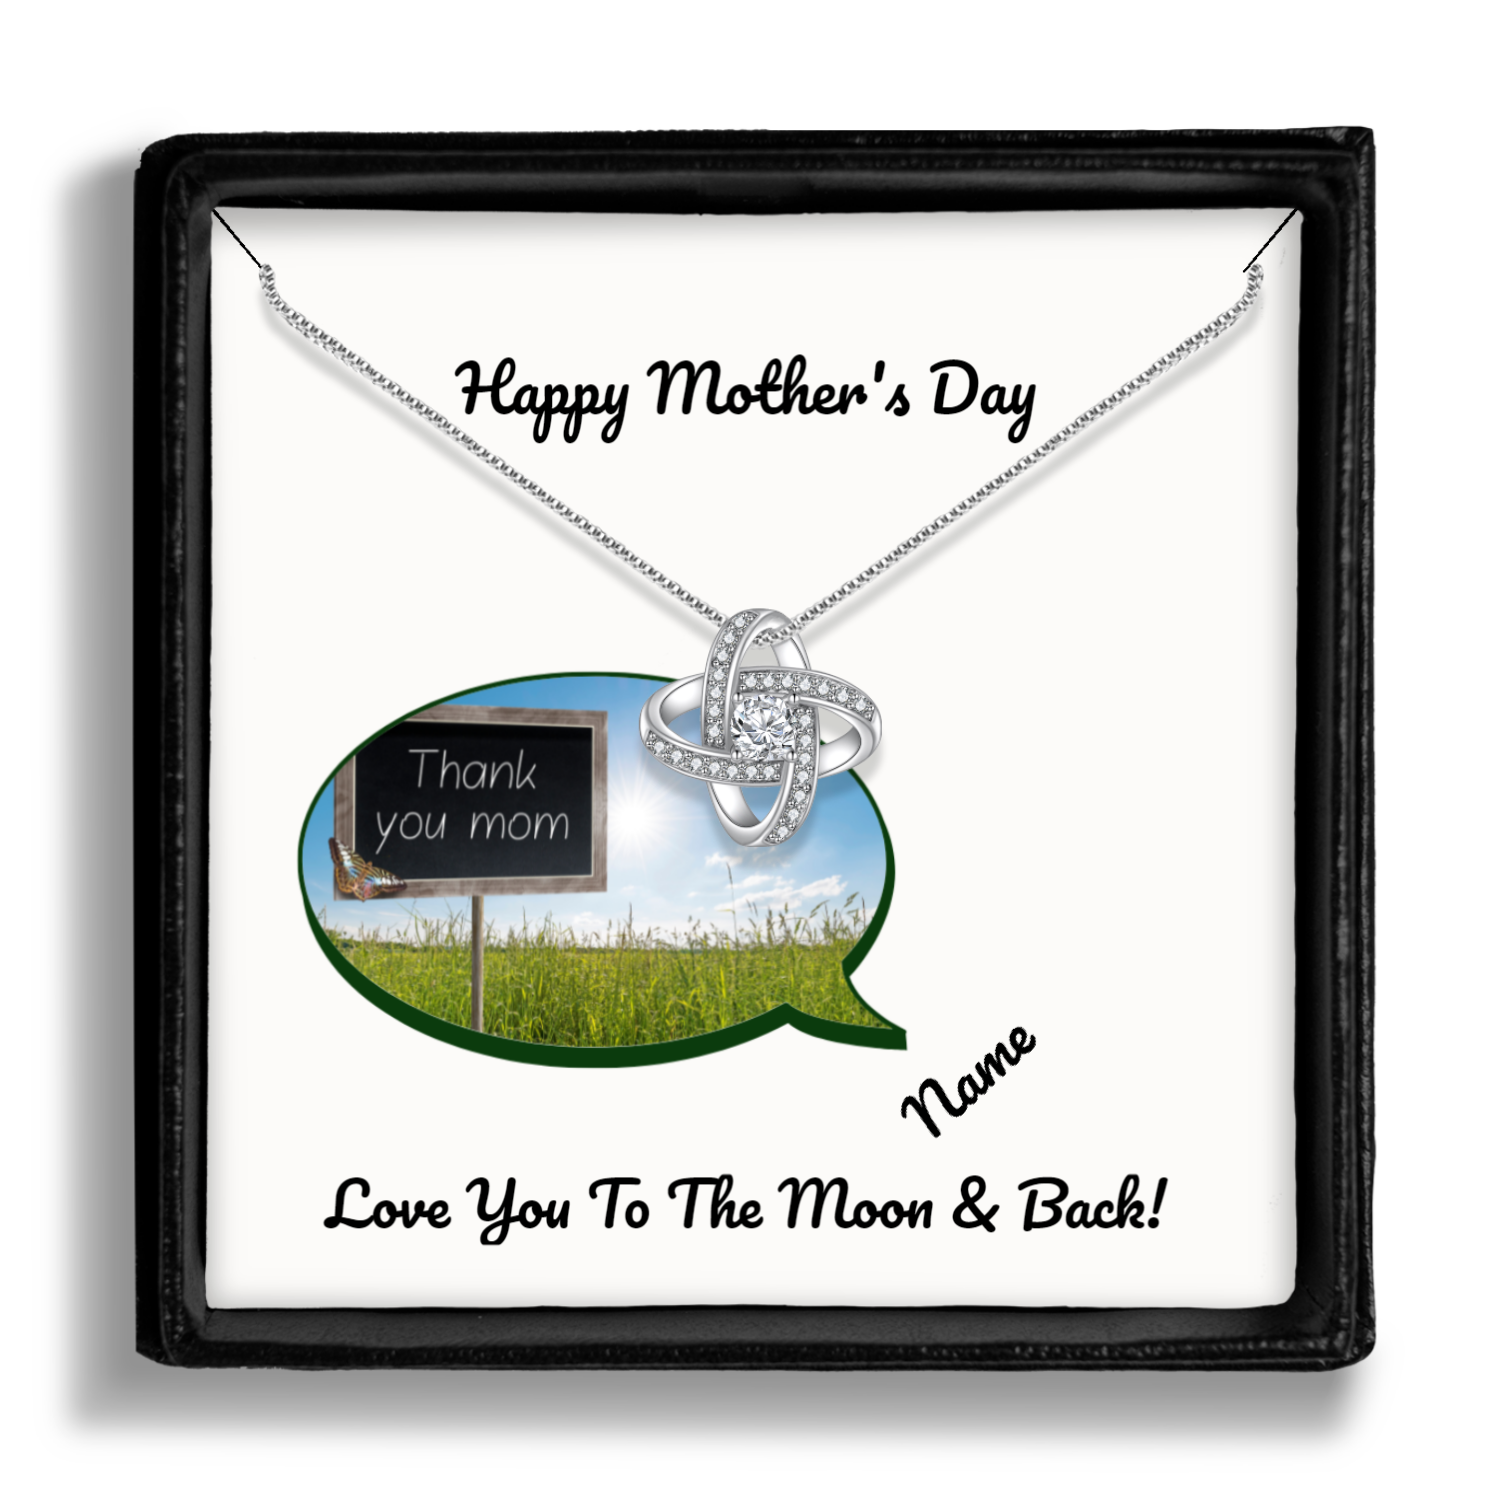 Personalized Necklaces + Message Cards - Mother's Love Knot Necklace 